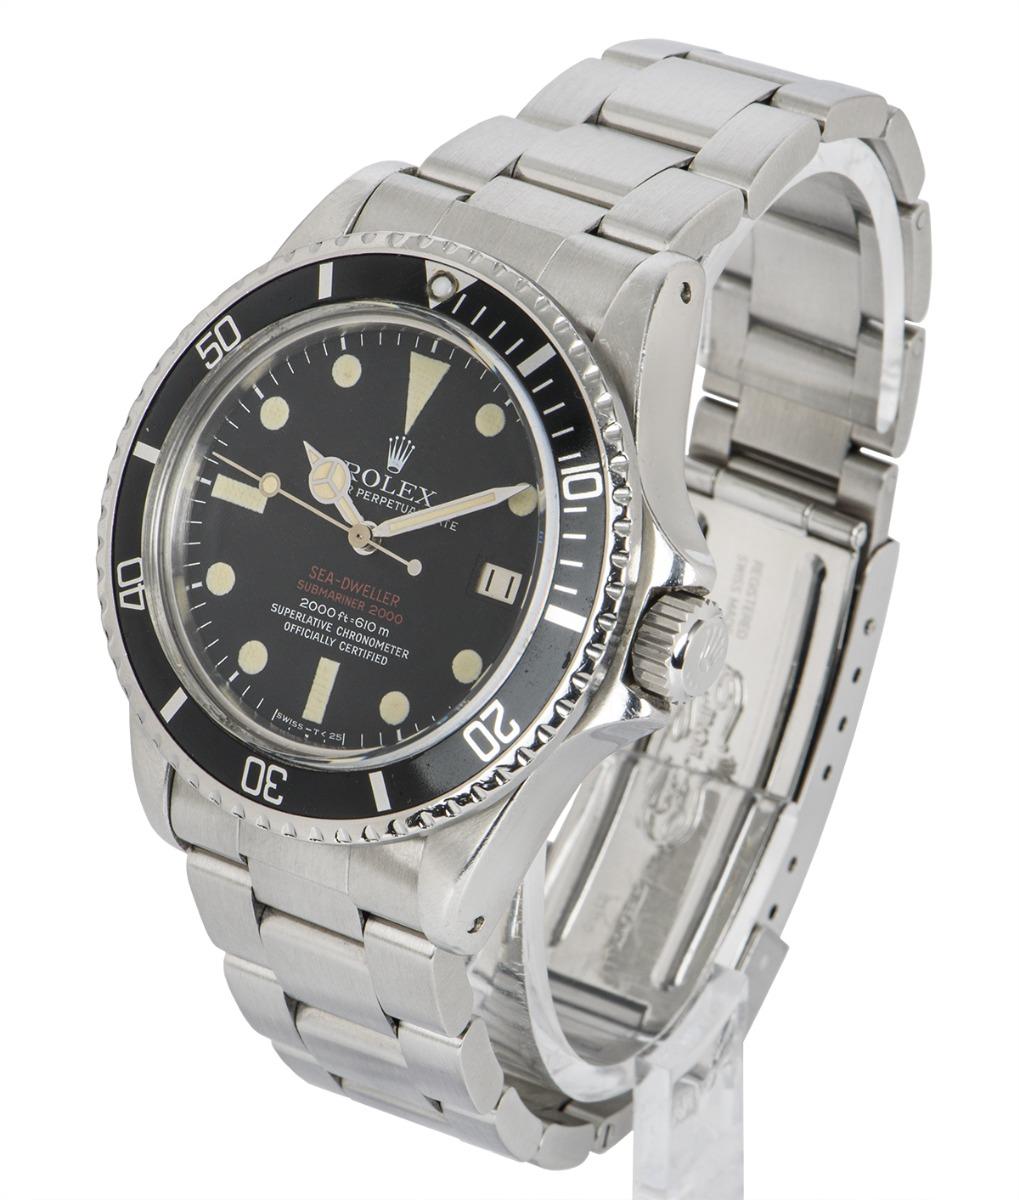 Rolex Sea-Dweller Double Red Vintage Stainless Steel Matte Black Mark III 1665 In Excellent Condition For Sale In London, GB